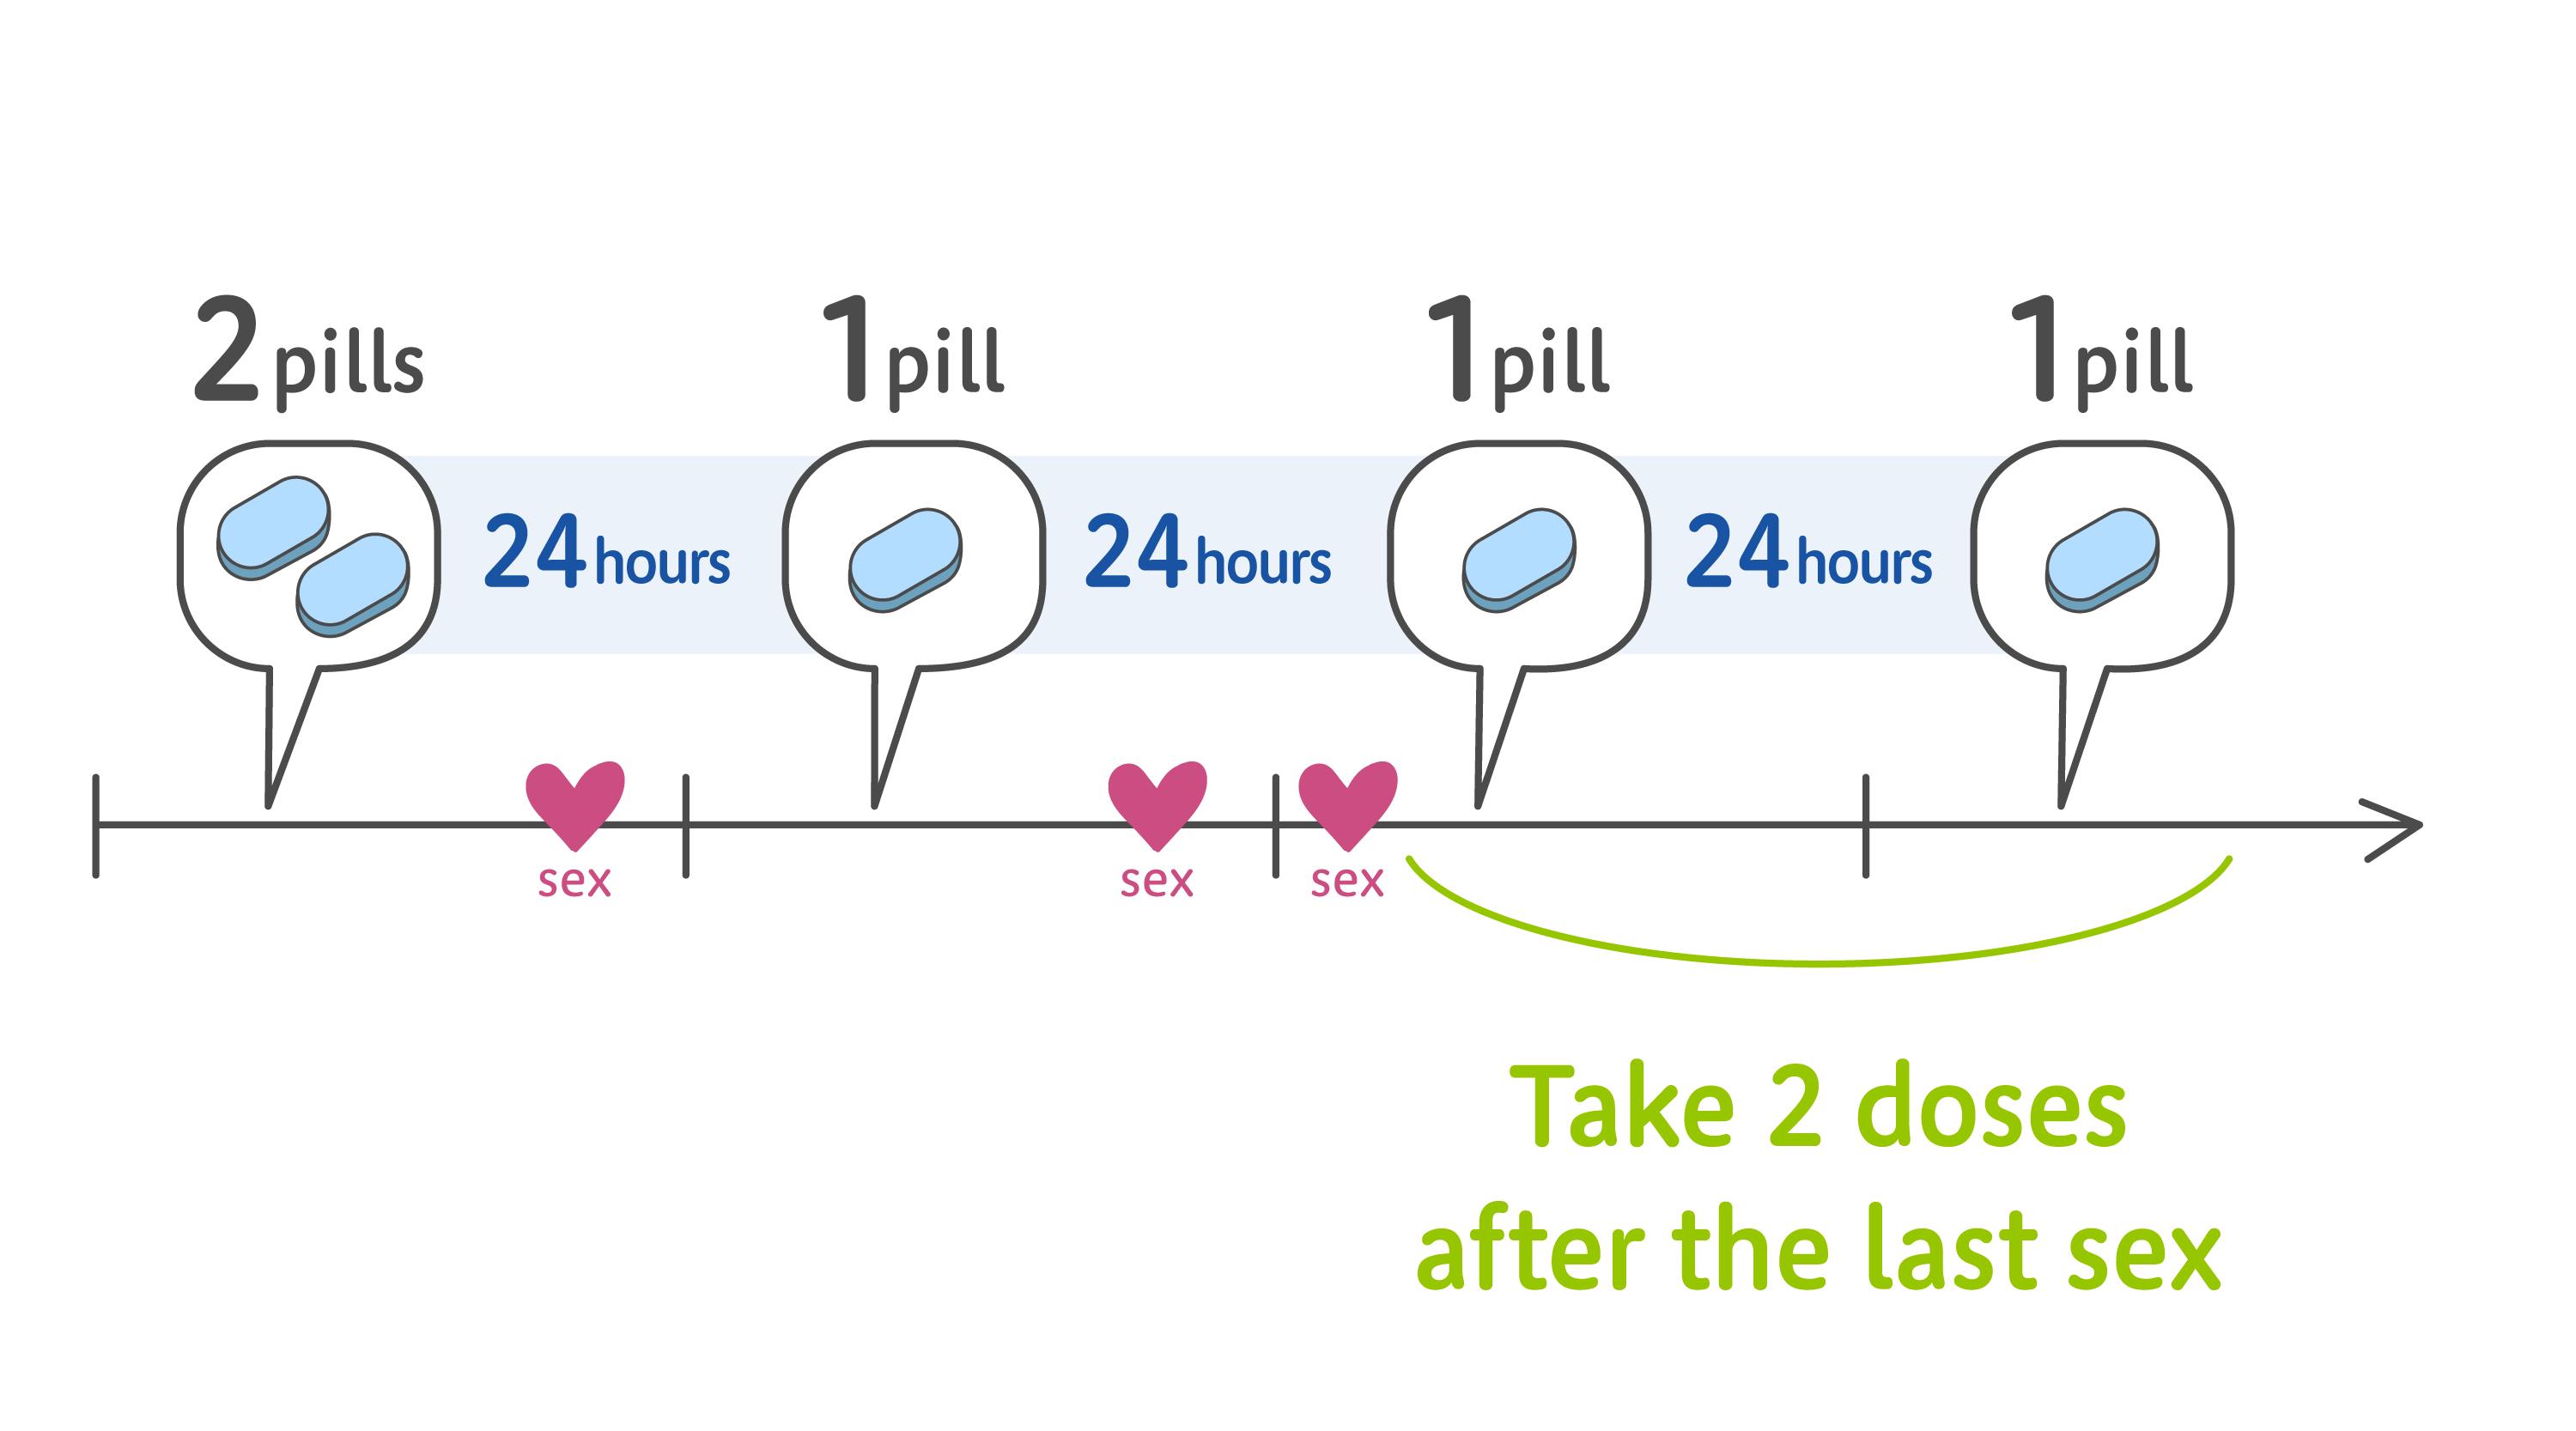 Take 2 doses after the last sex